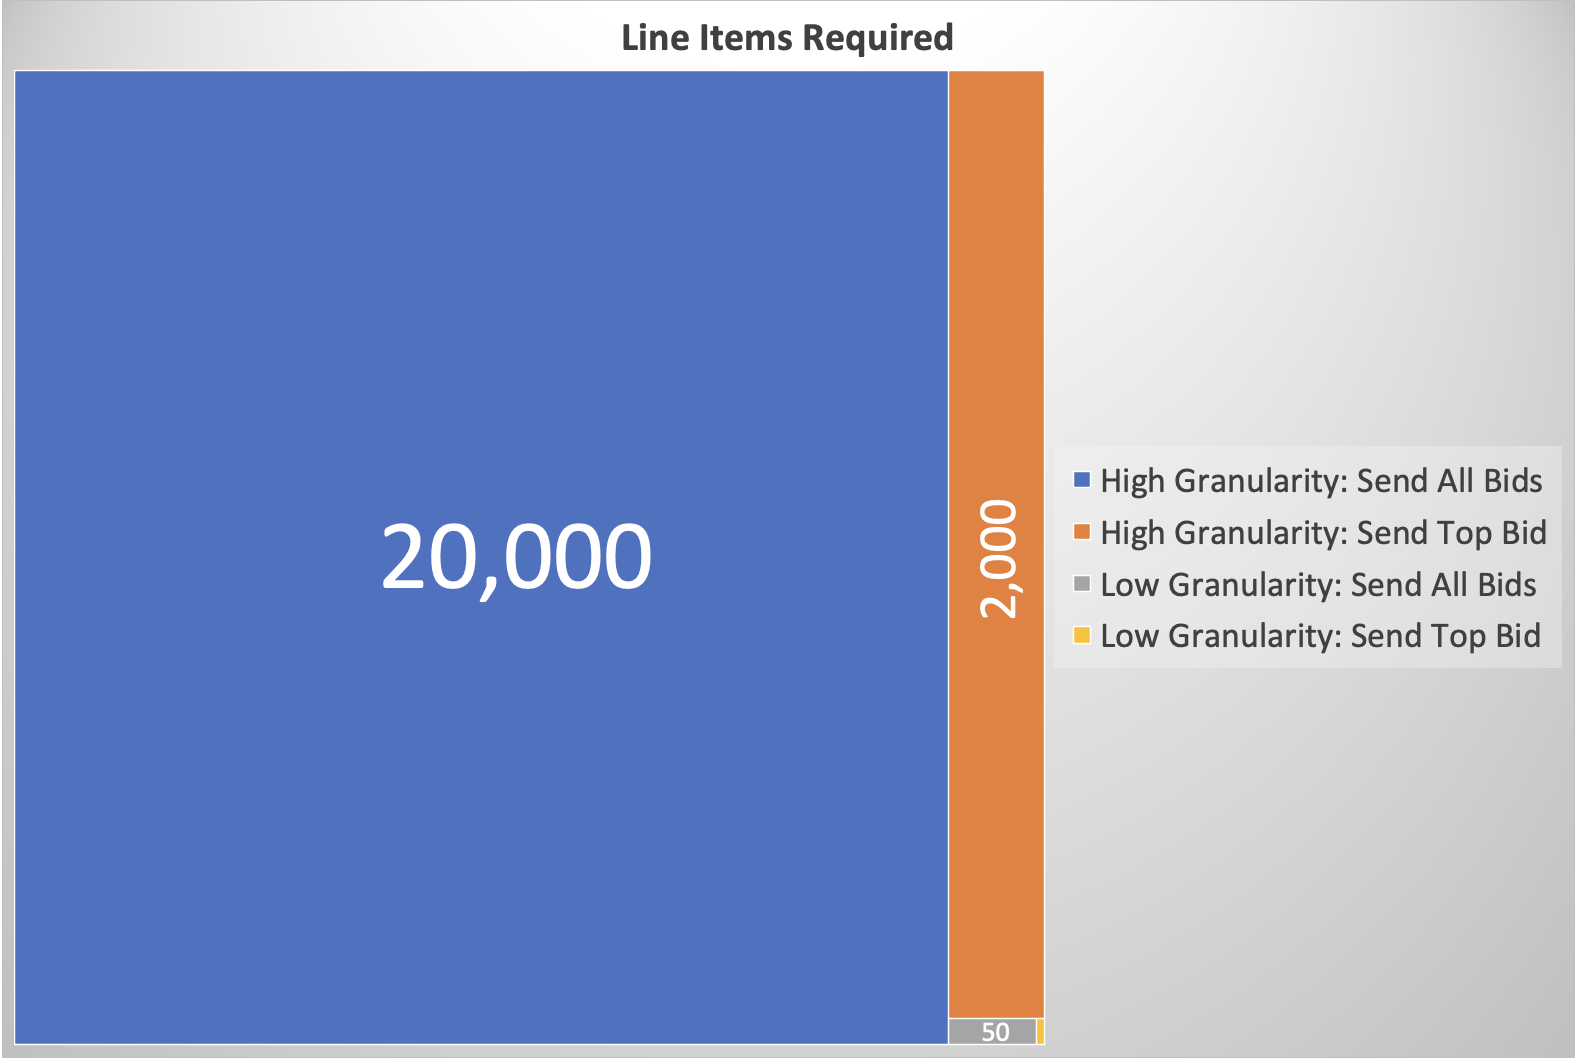 Line Items Required per Price Granularity